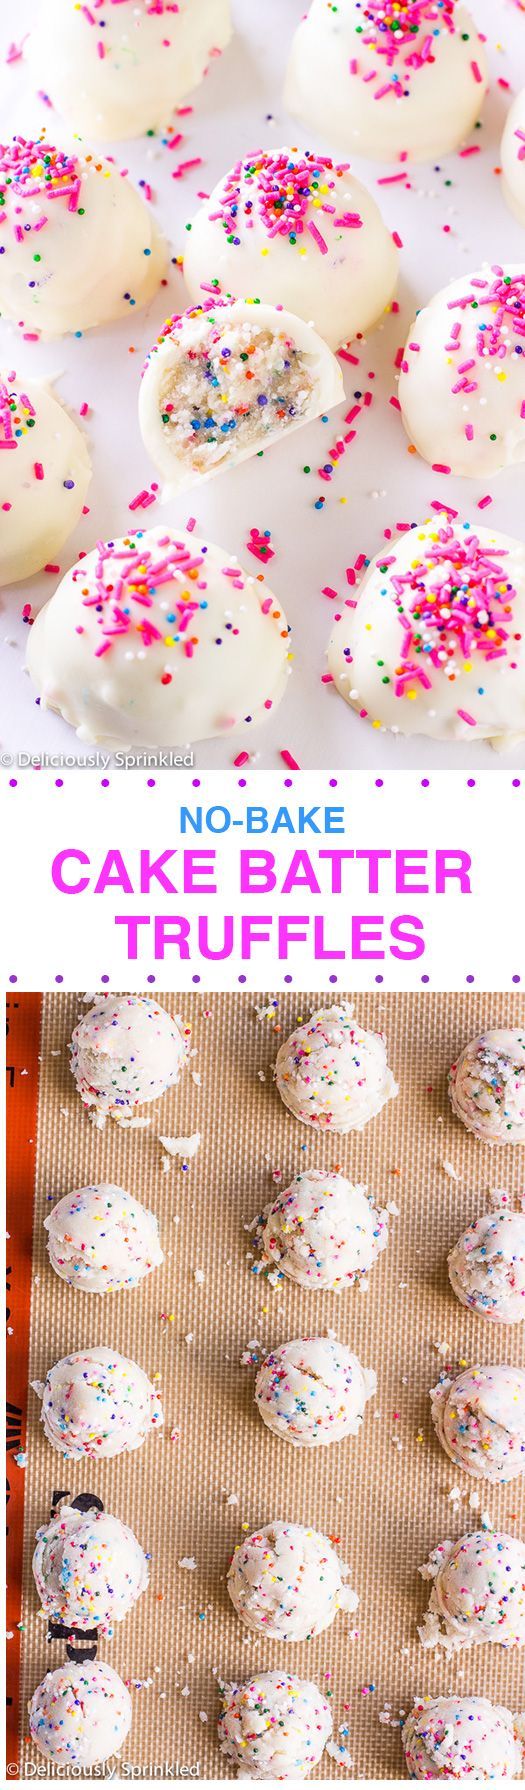 No-Bake Cake Batter Truffles – Perfect dessert for the summer months when it’s too hot to turn on th